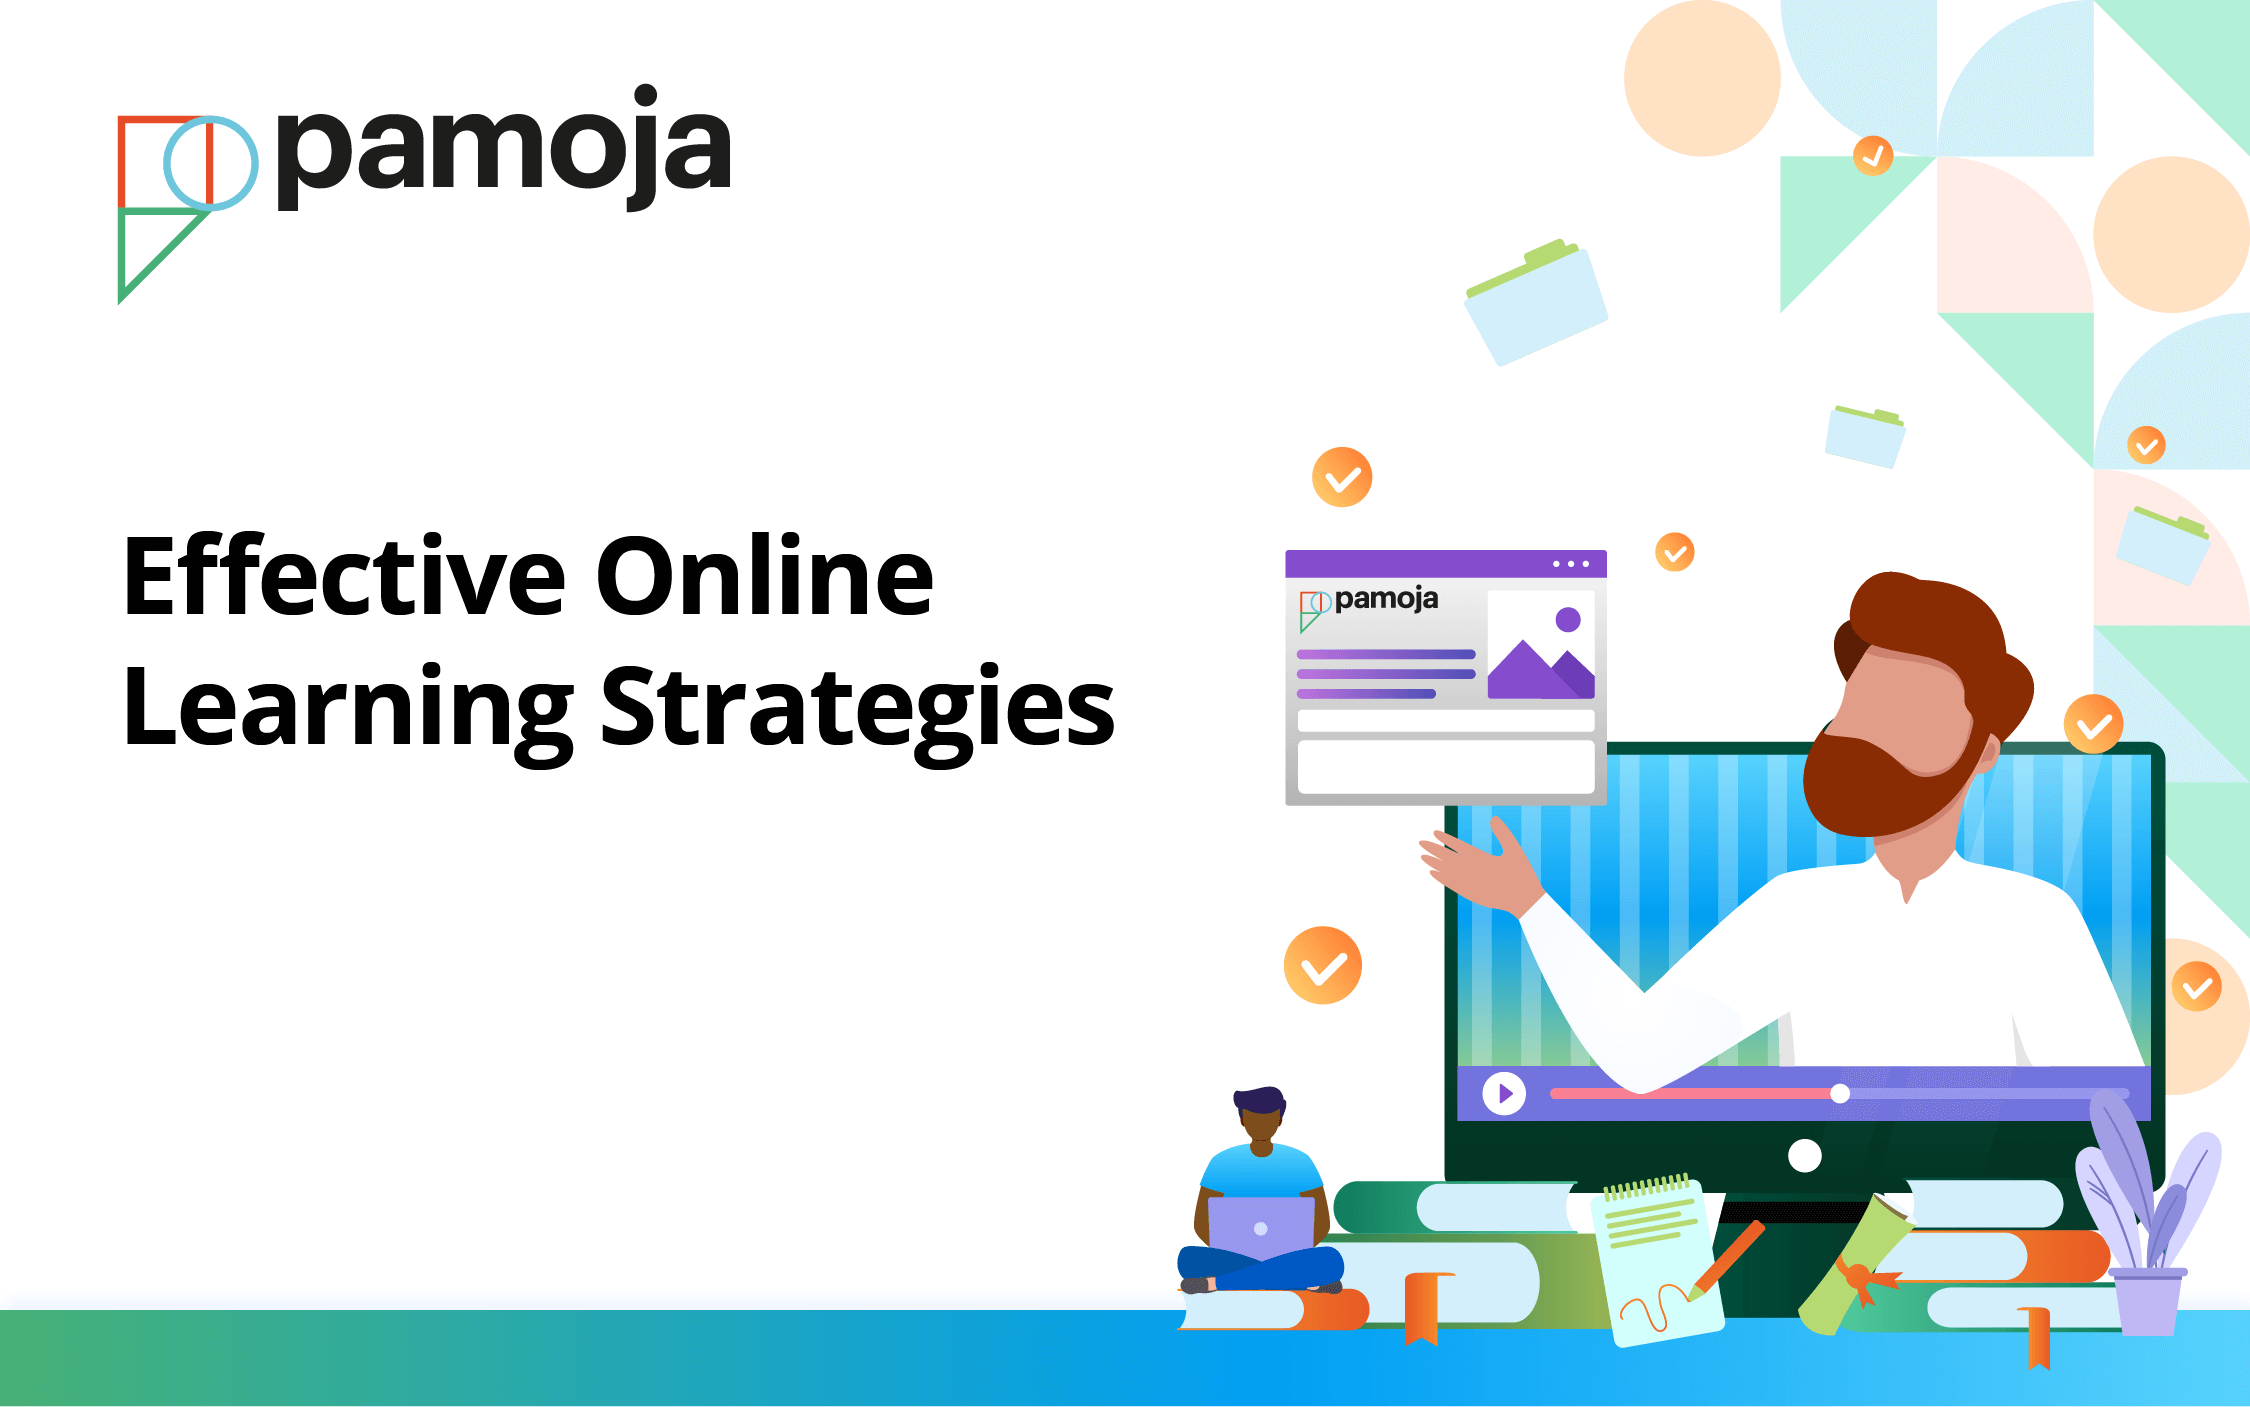 Strategies for Effective Online Learning Based on the the Pamoja Pedagogical Model